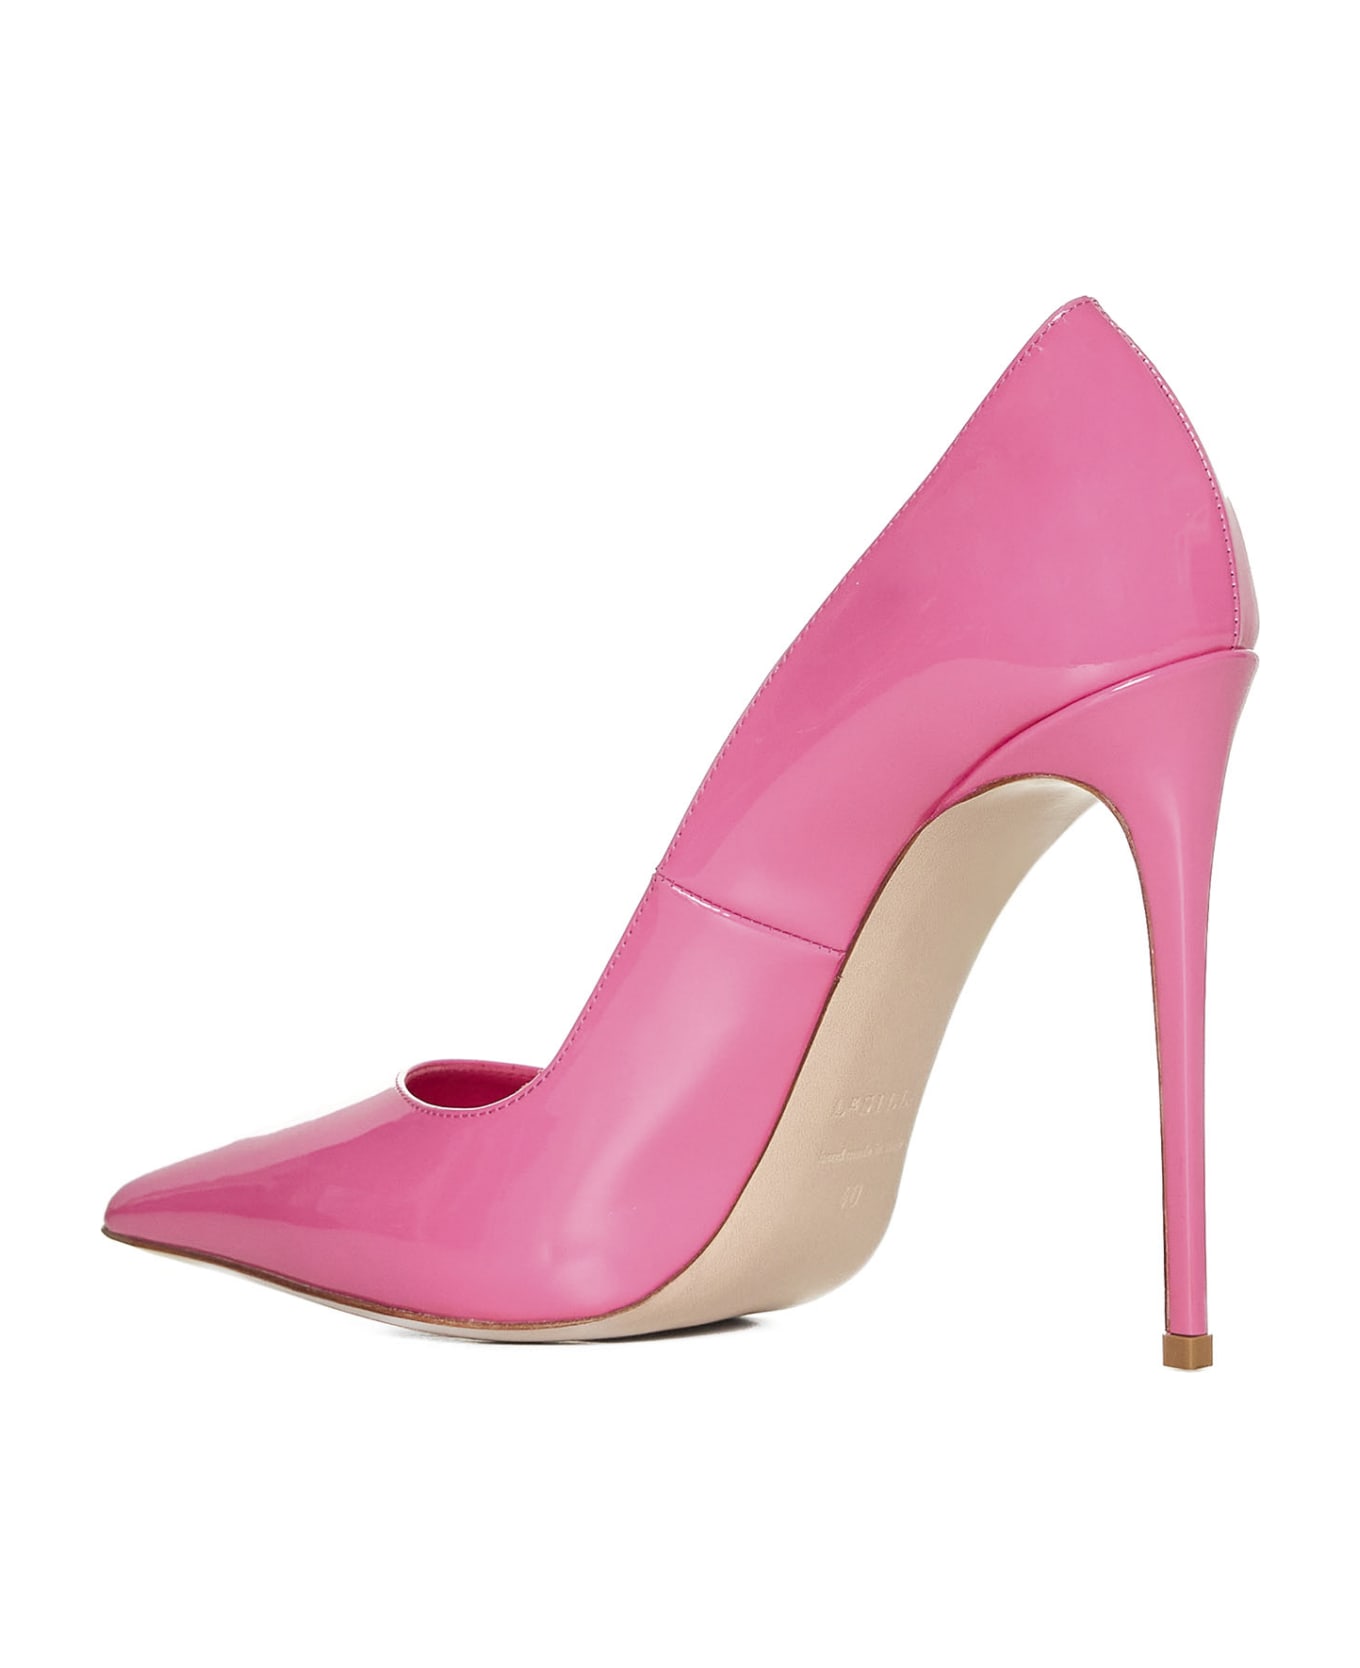 Le Silla High-heeled shoe - Party